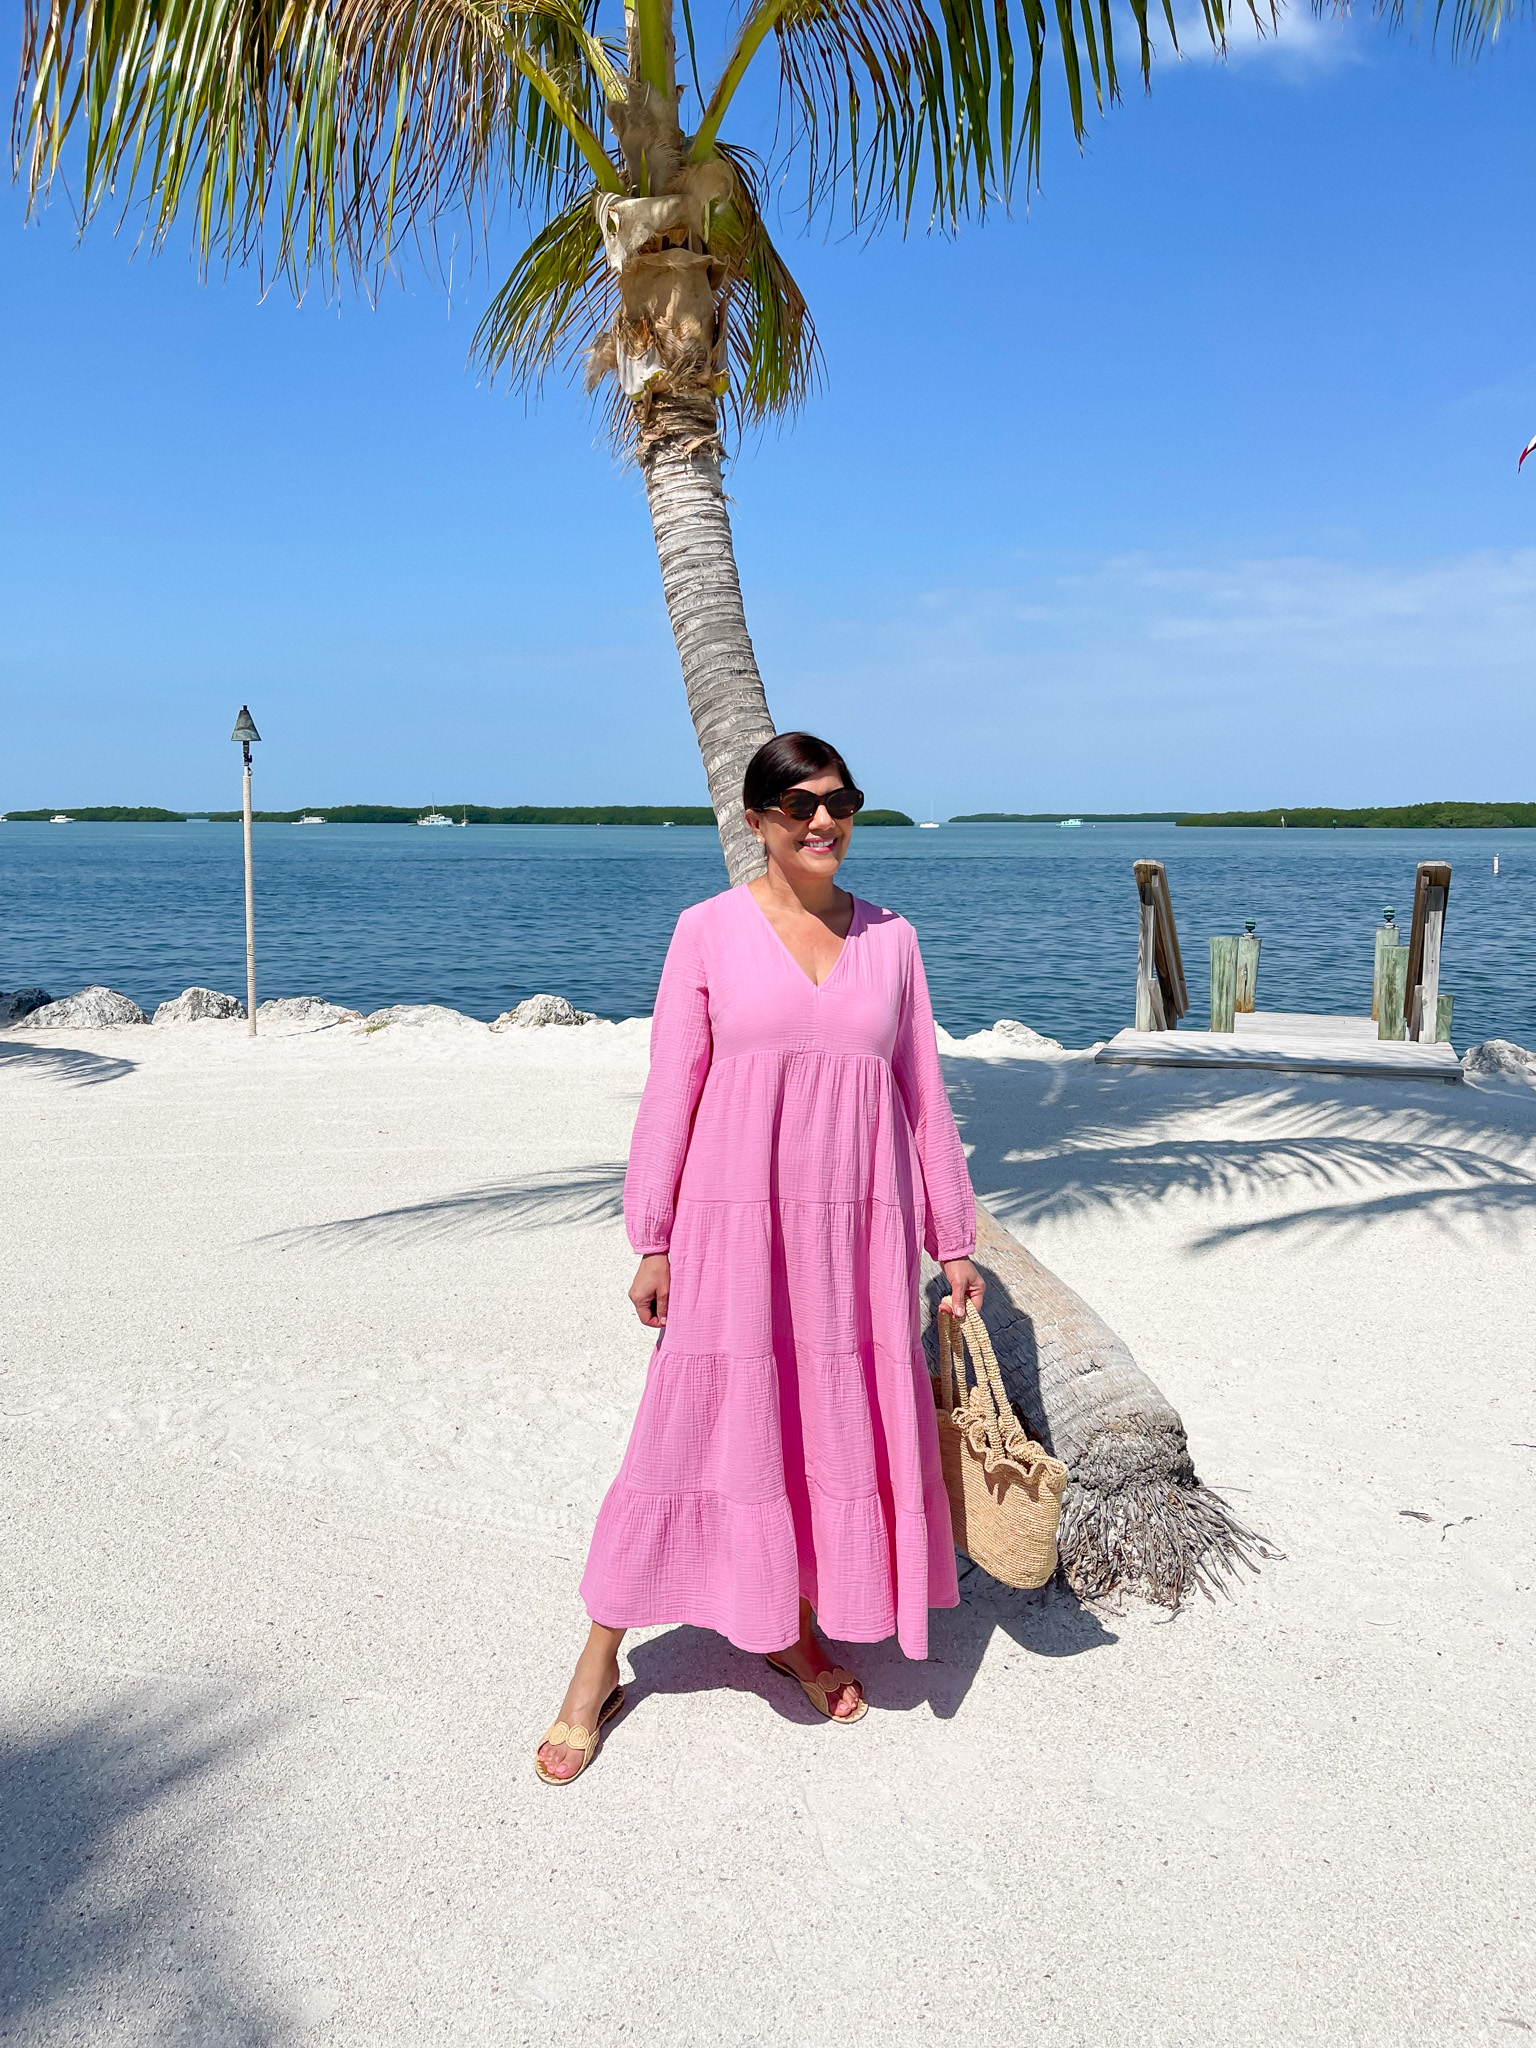 Desiree Leone of Beautifully Seaside shares sunny looks for spring break to shop for your warm weather getaway.